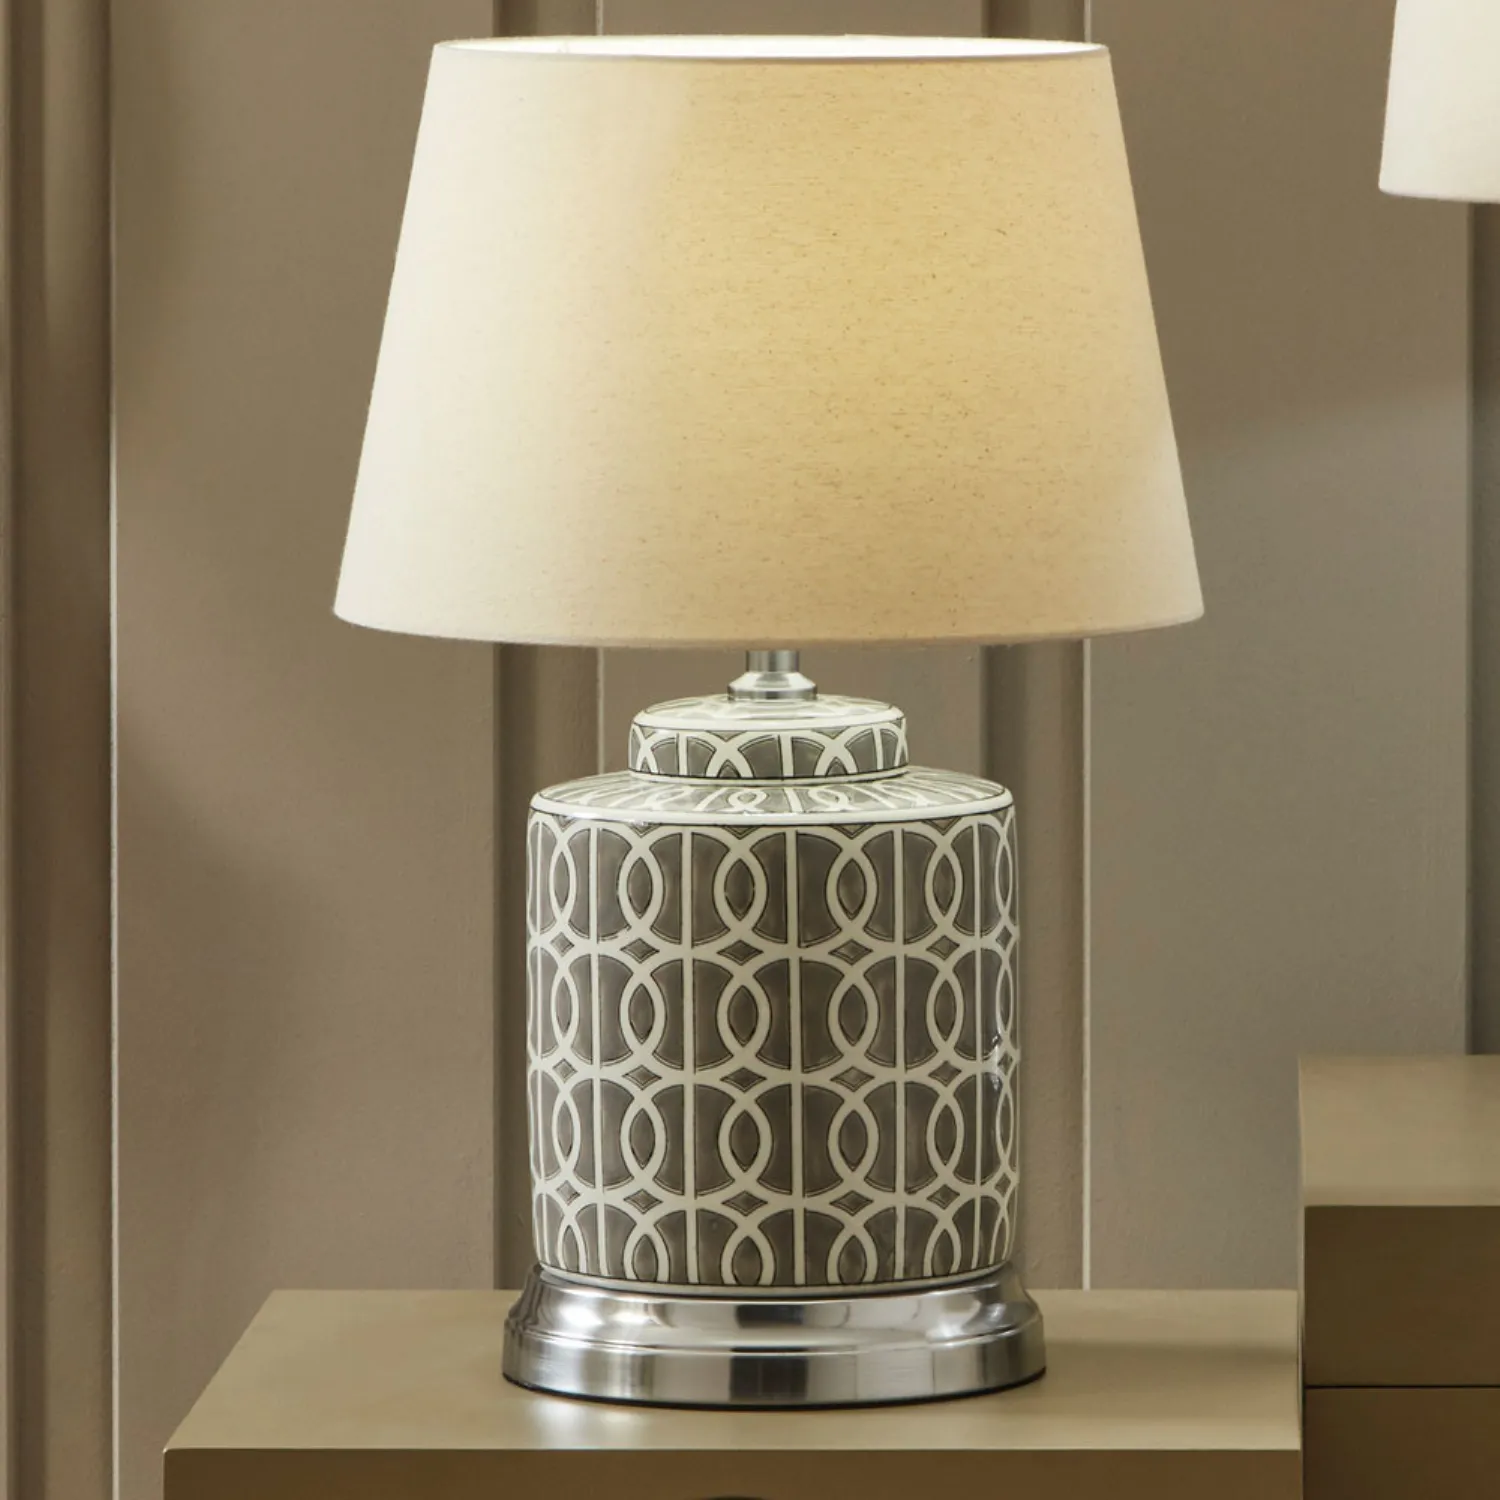 Grey and White Ceramic Table Lamp Metal Base and Cream Shade